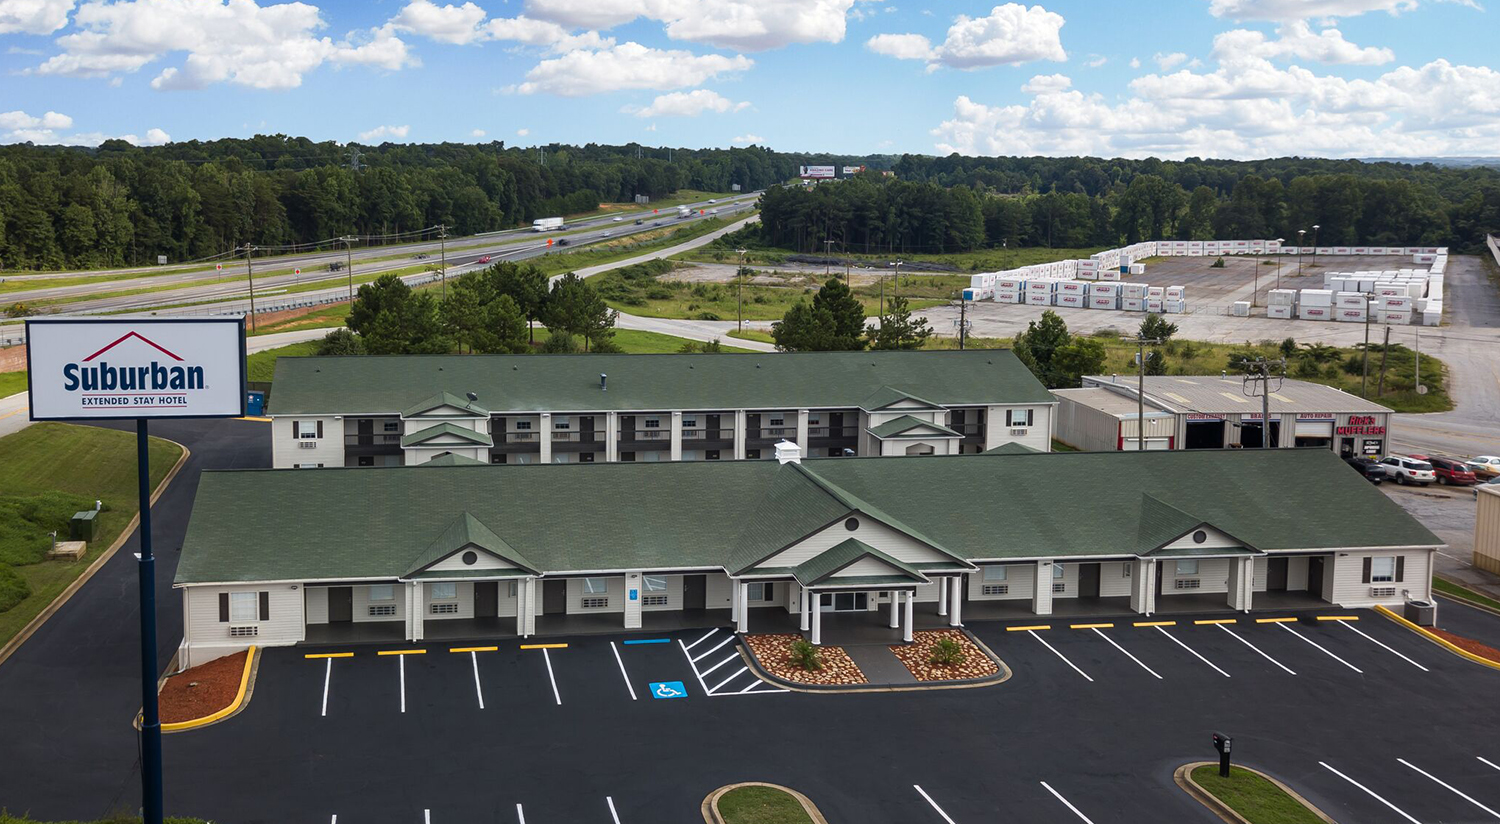 WELCOME TO SUBURBAN EXTENDED STAY HOTEL IN SPARTANBURG, SOUTH CAROLINA